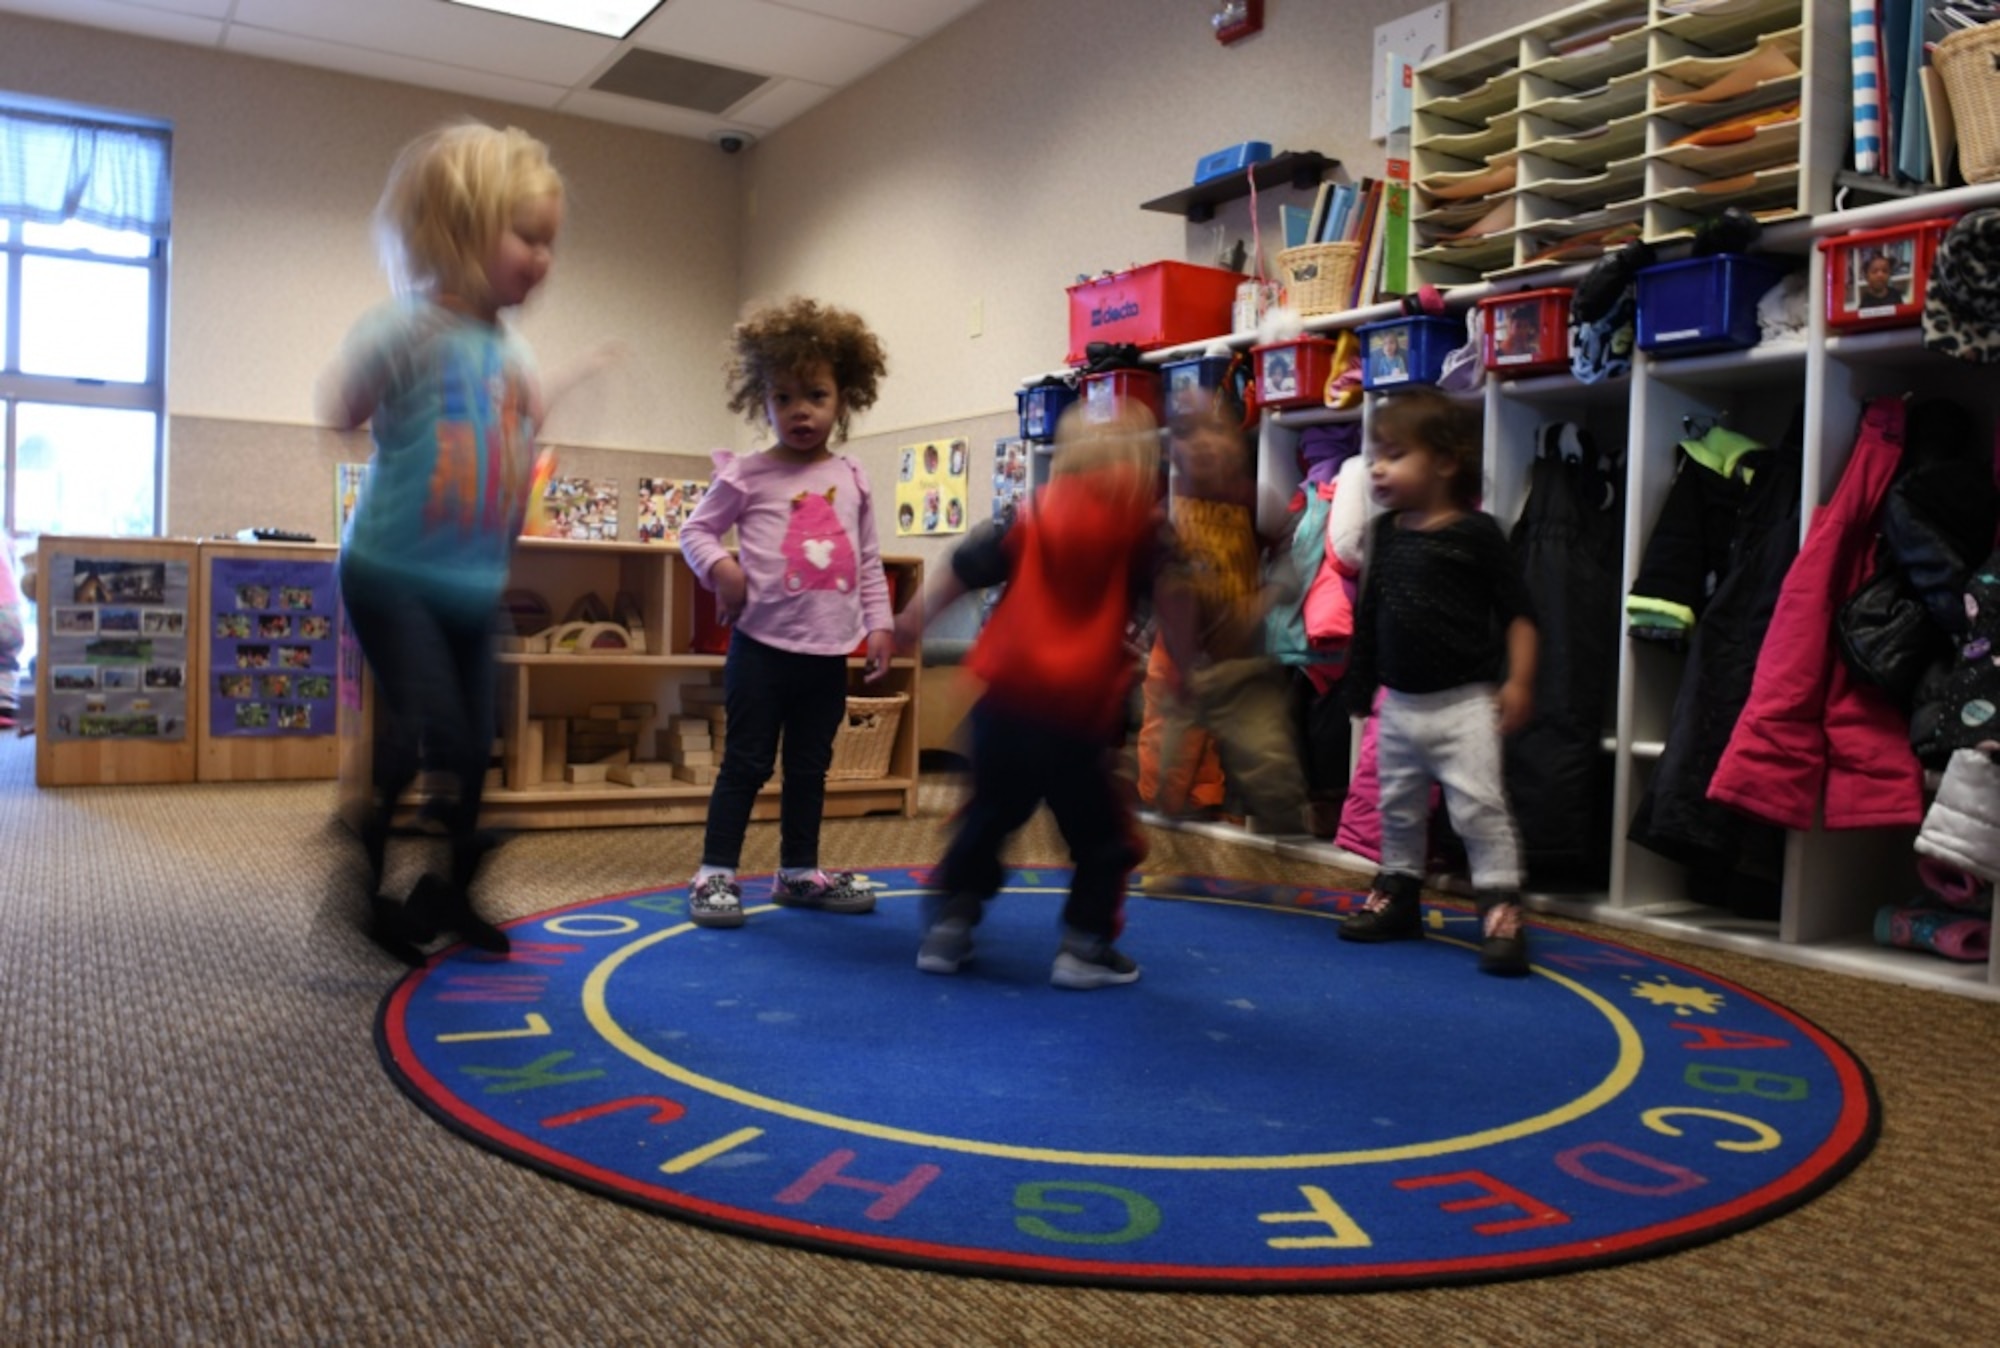 Toddlers from room 138 dance to "Jingle Bells" at the McRaven Child Development Center on Ellsworth Air Force Base, S.D., Dec. 6, 2018. April has been designated as the Month of the Military Child. It is set aside to honor the strength and sacrifices of military children across all branches. (U.S. Air Force photo by Airman 1st Class Christina Bennett)